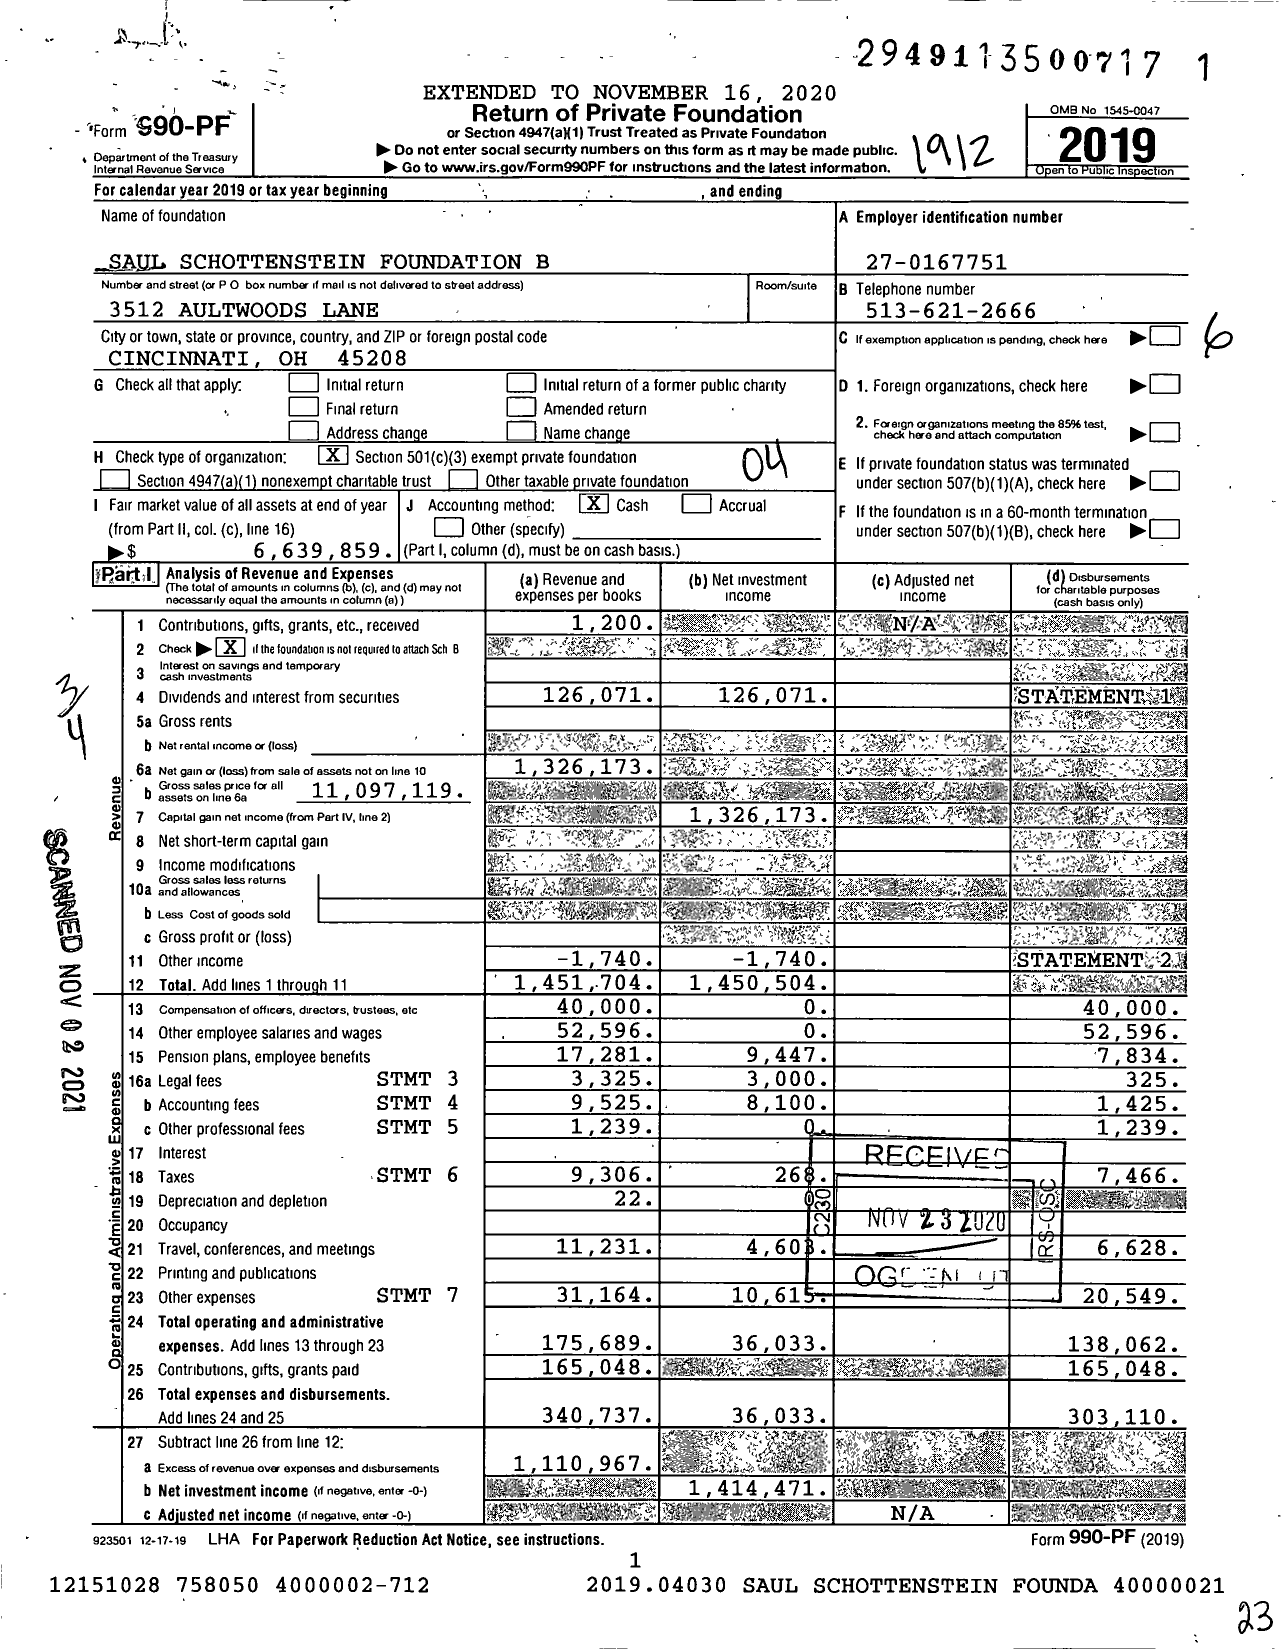 Image of first page of 2019 Form 990PF for Saul Schottenstein Foundation B